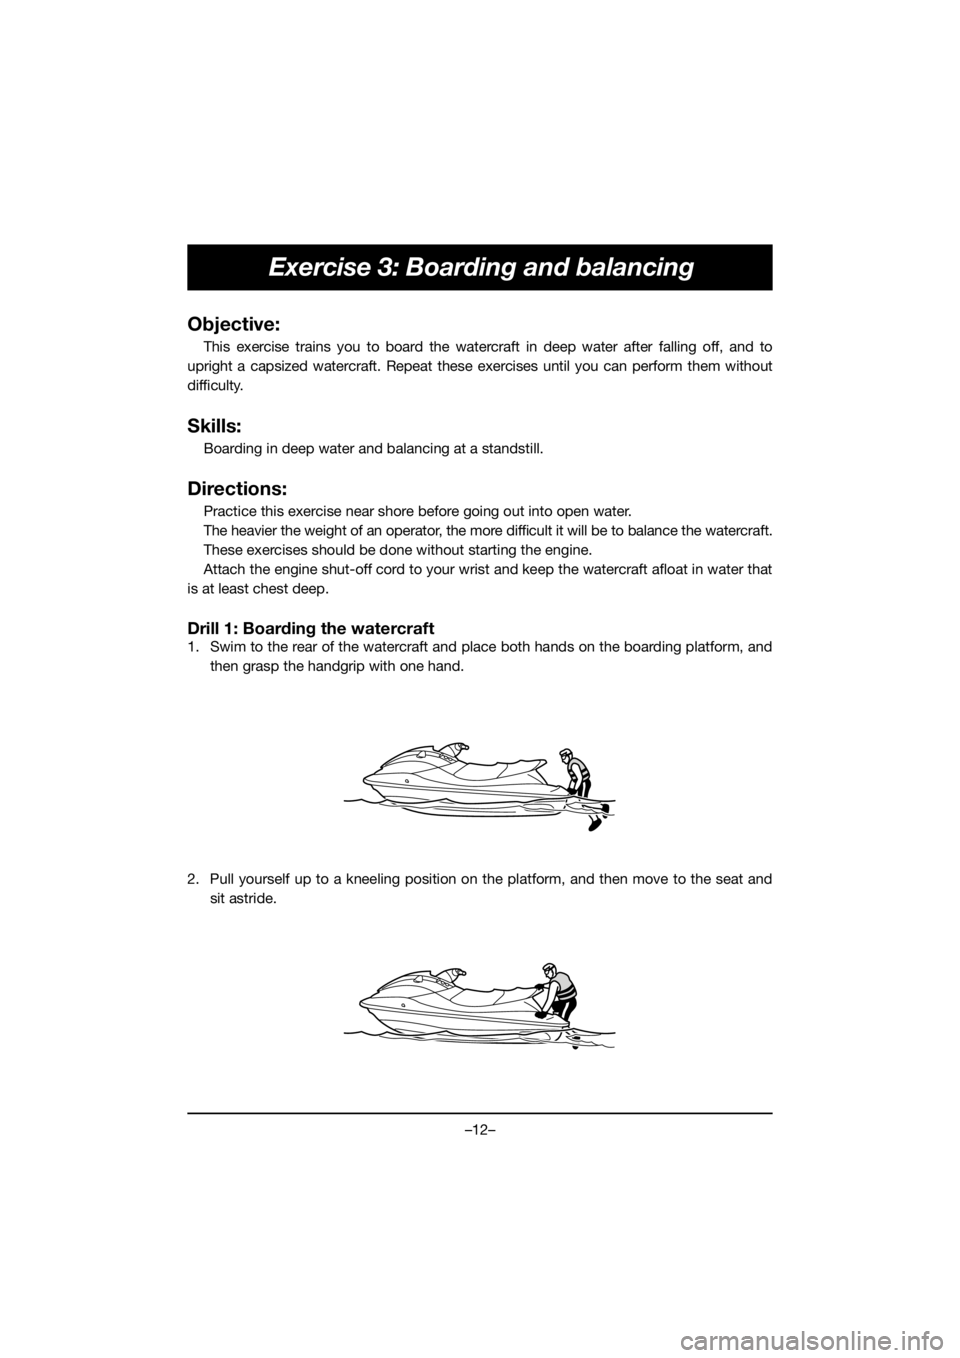 YAMAHA VX DELUXE 2021 User Guide –12–
Exercise 3: Boarding and balancing
Objective:
This exercise trains you to board the watercraft in deep water after falling off, and to
upright a capsized watercraft. Repeat these exercises un